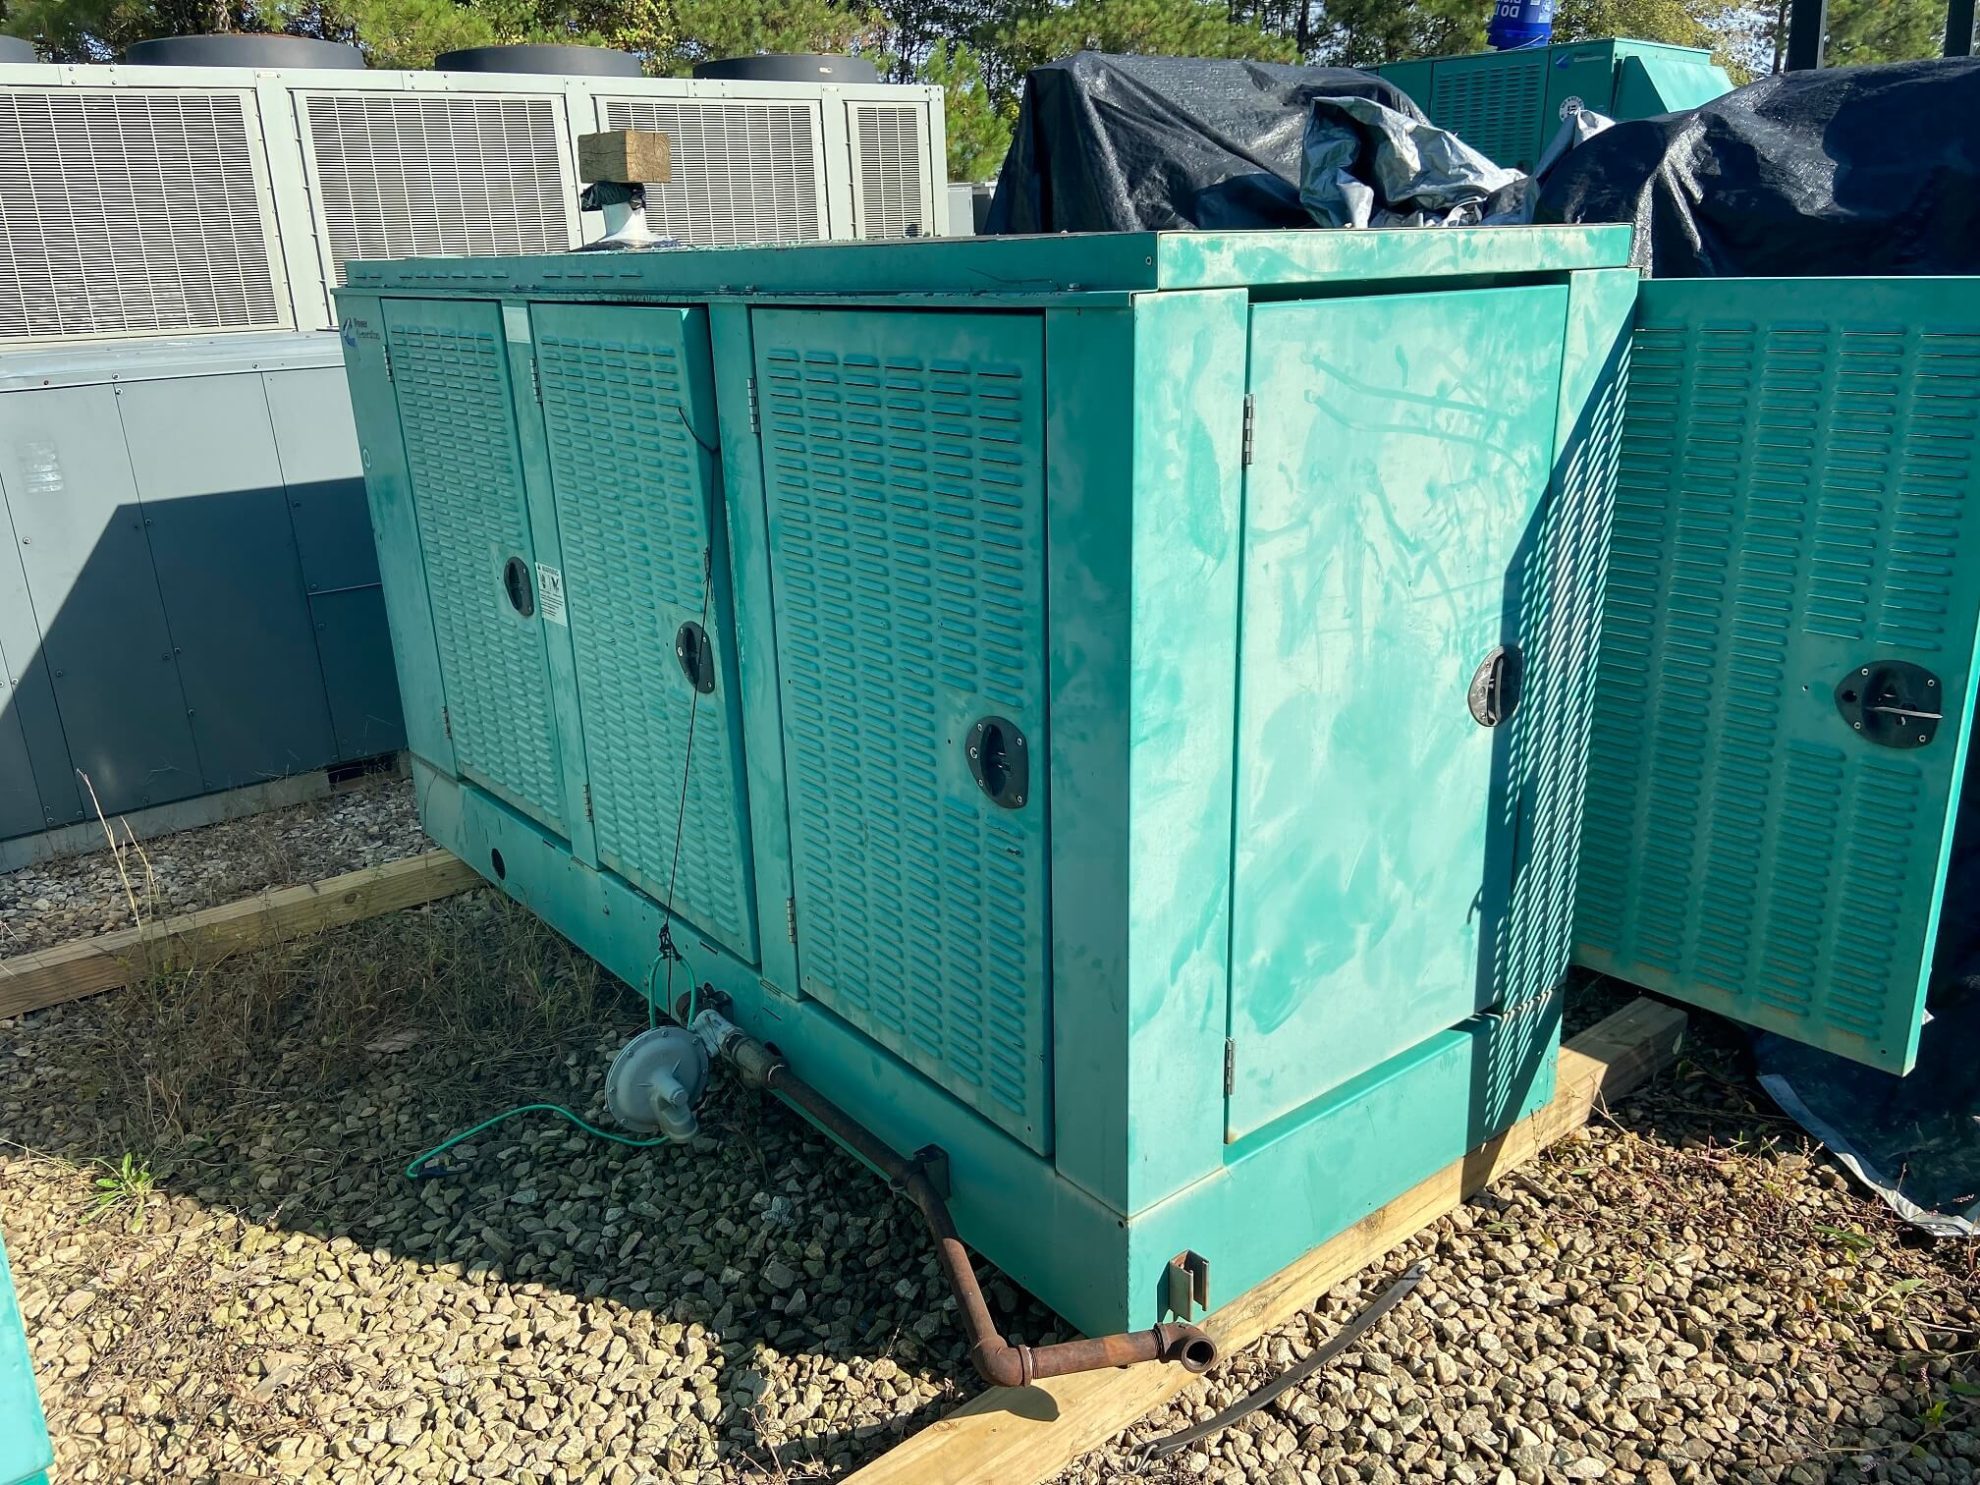 100 KW Cummins GGHH 5567922 Natural Gas Generator For Sale L7064 4 Scaled 